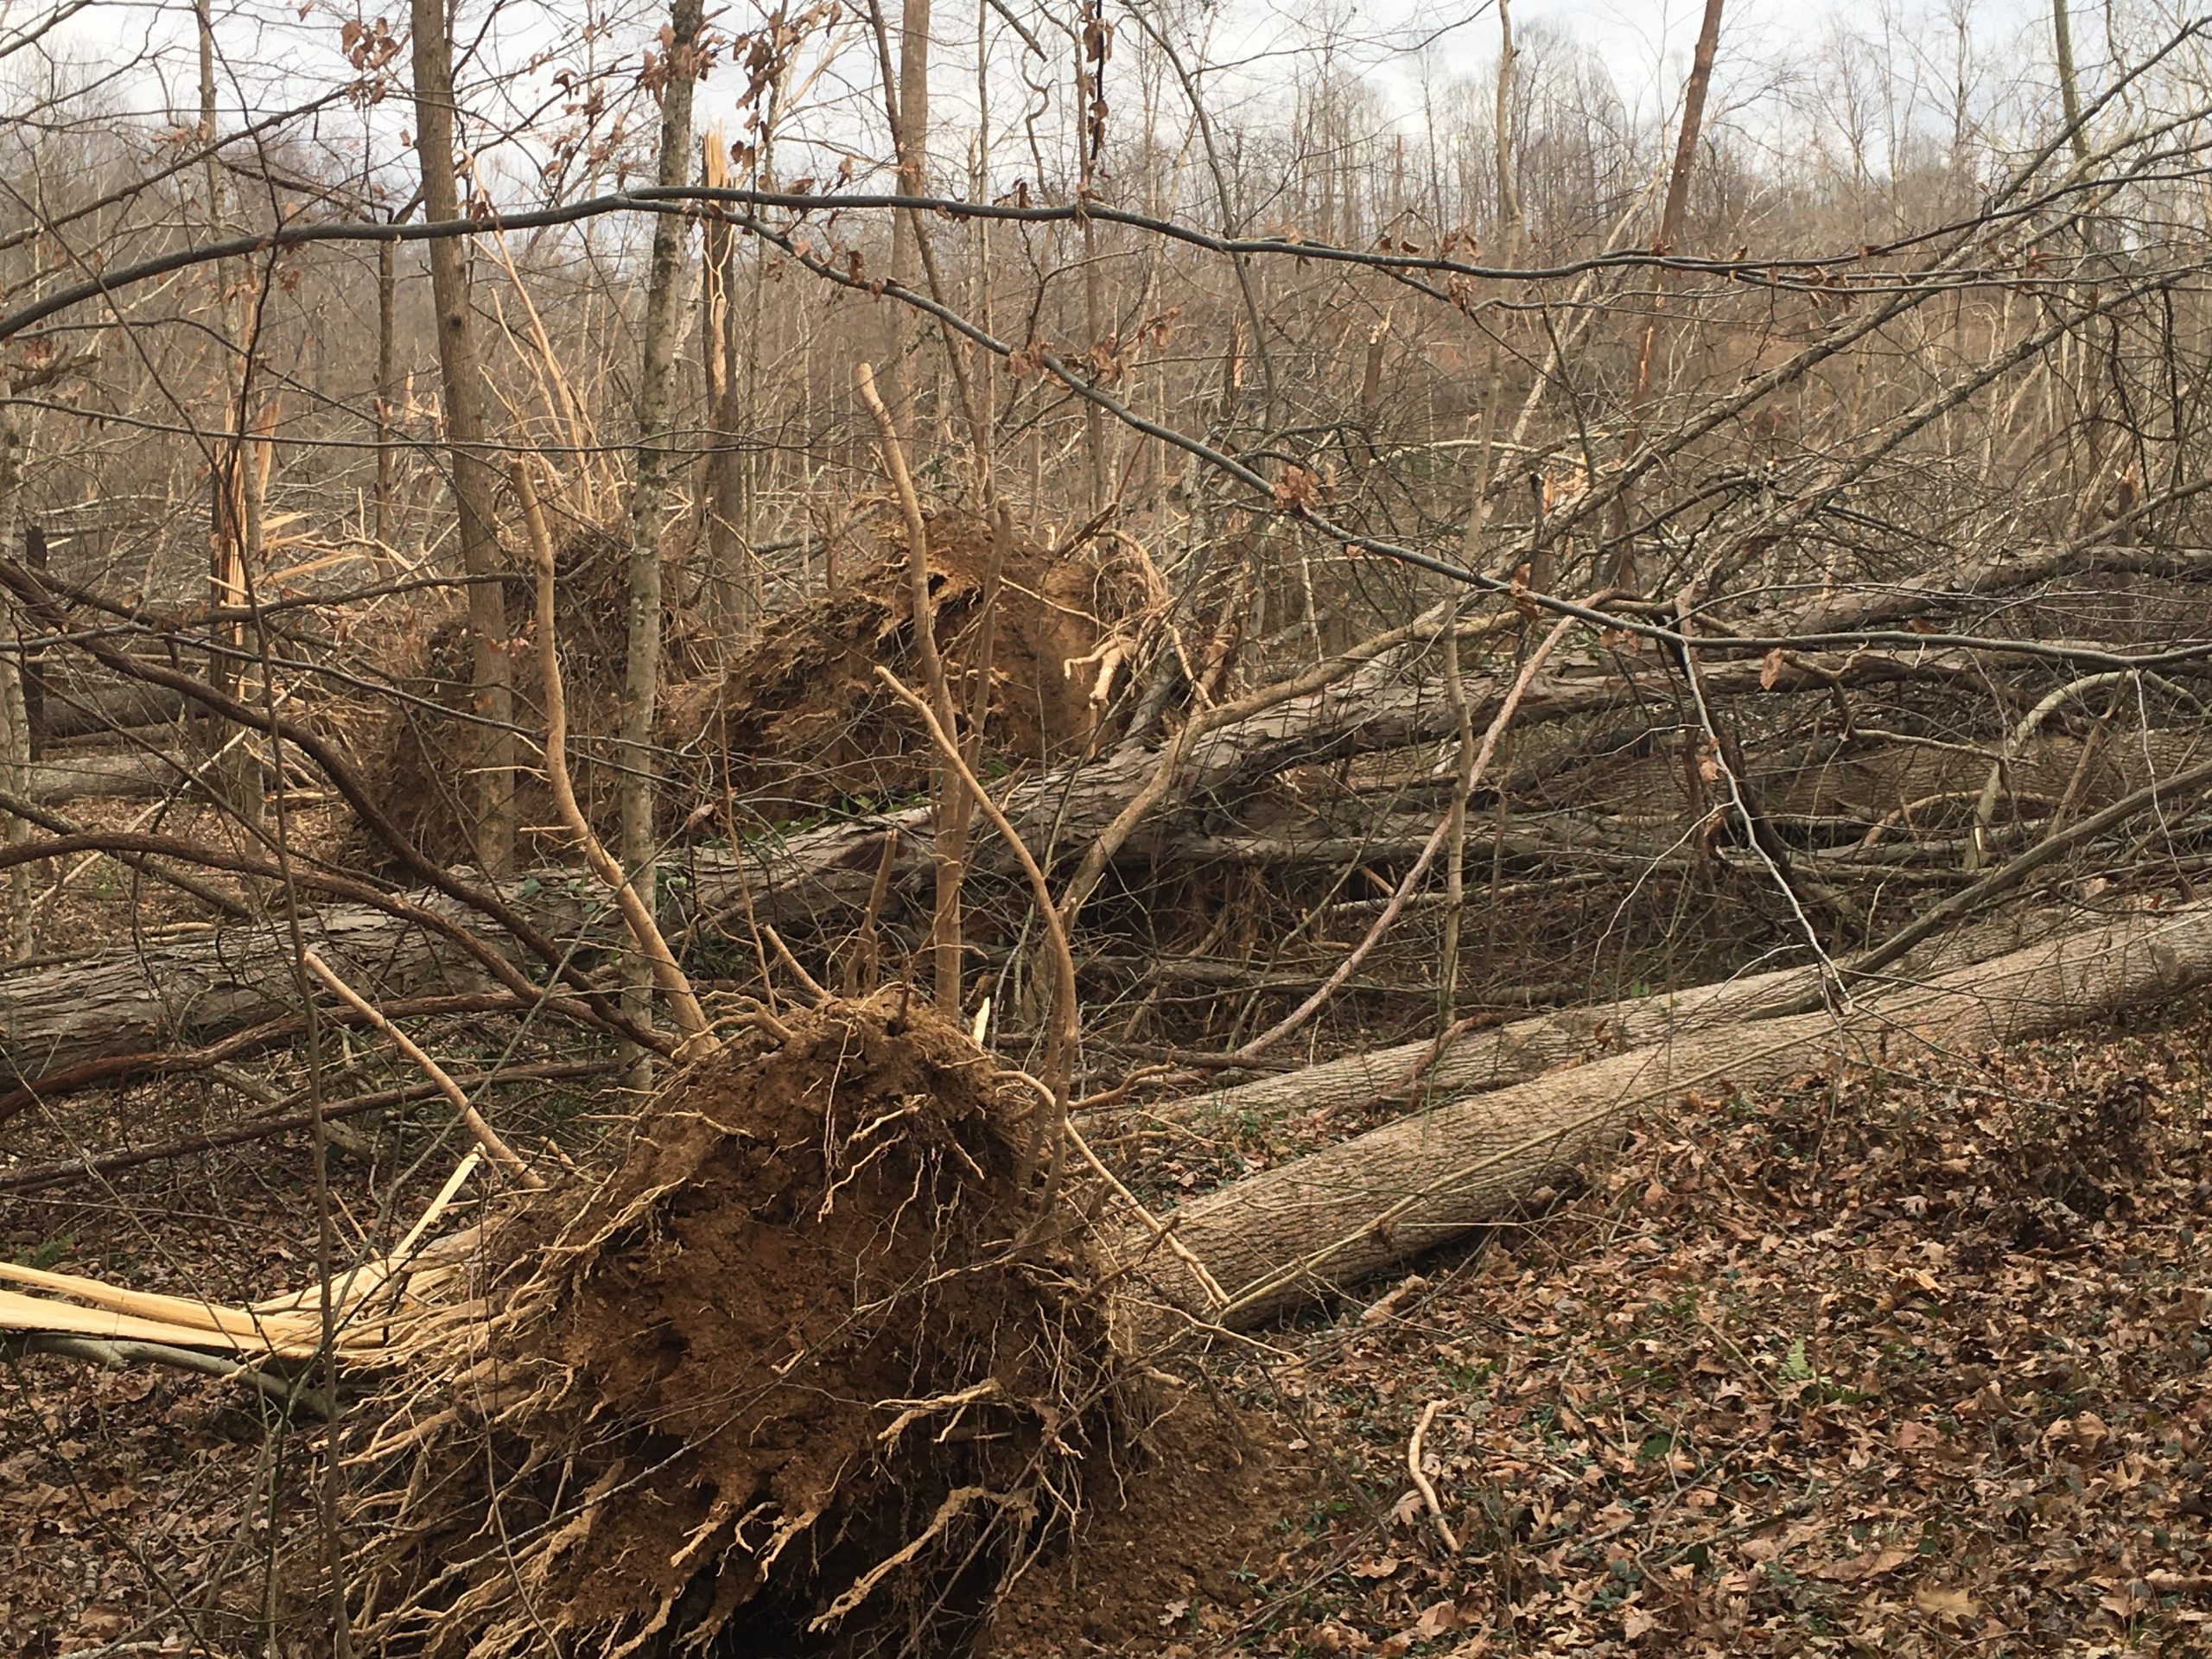 Giant trees uprooted by tornado